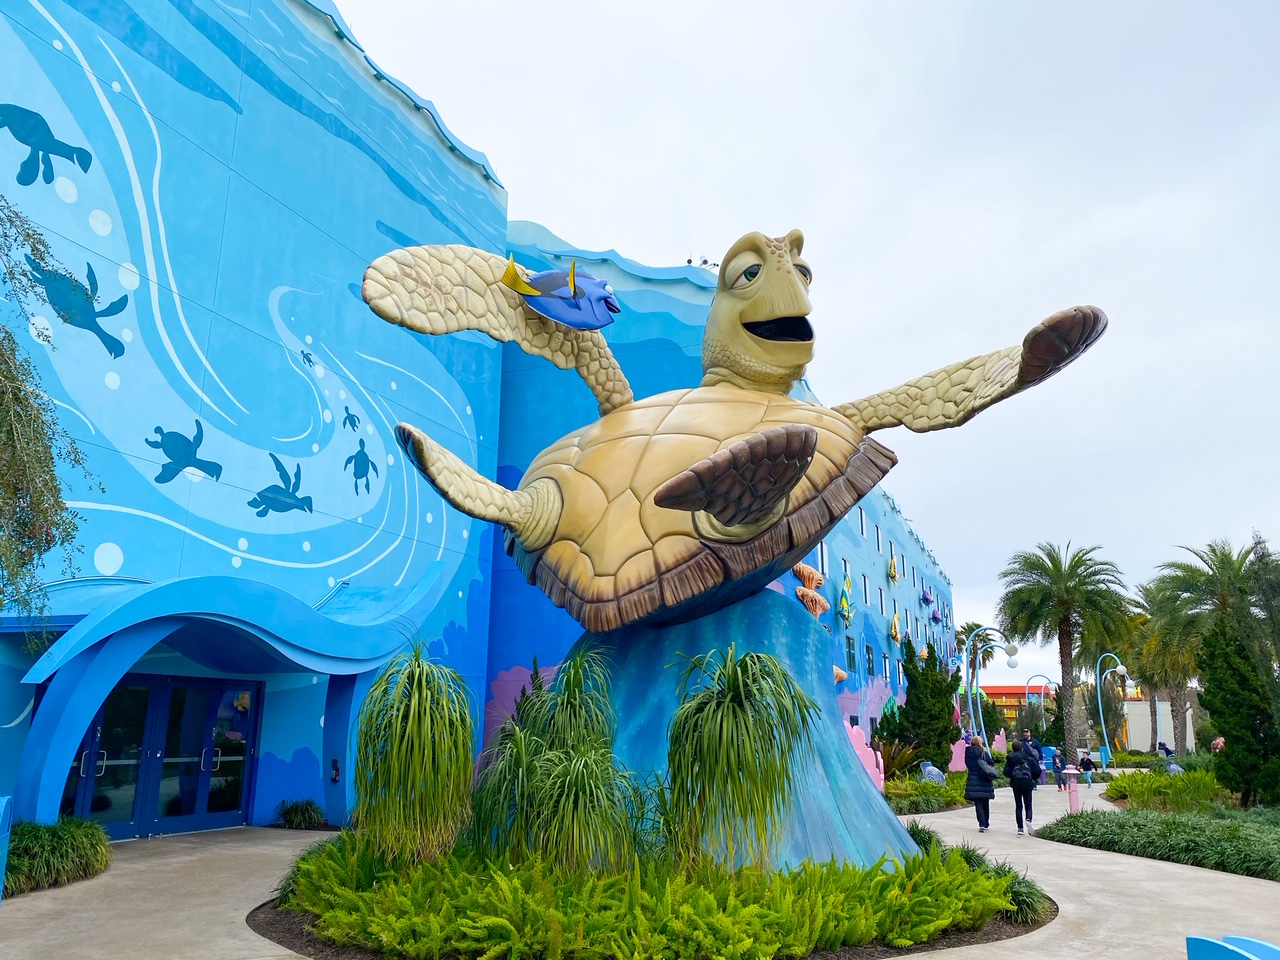 Giant statue of Crush the Sea Turtle at Art of Animation